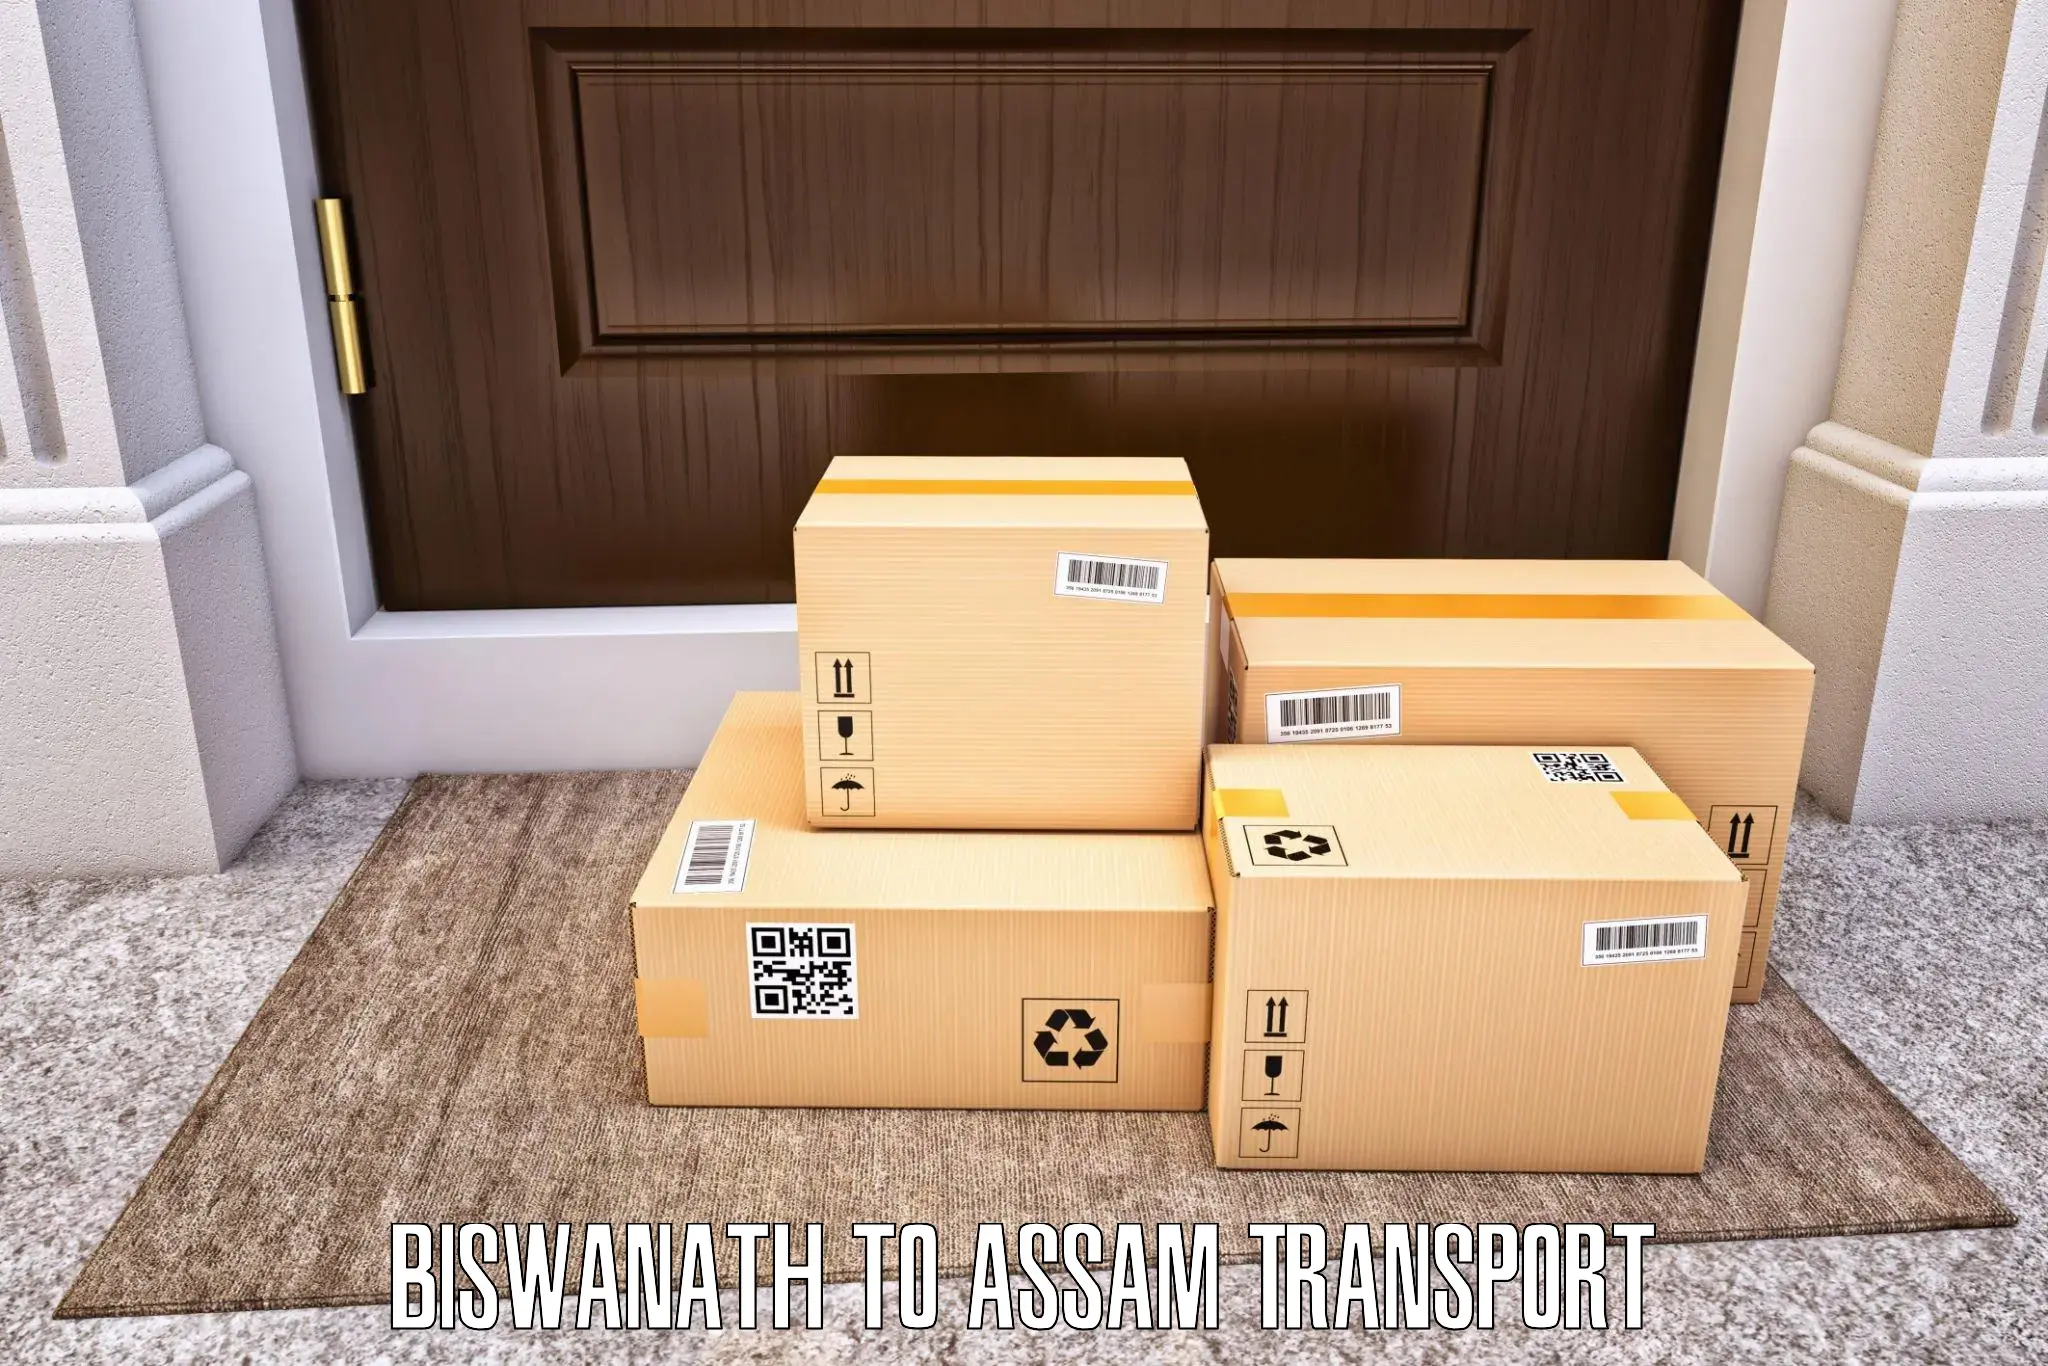 Delivery service Biswanath to Assam